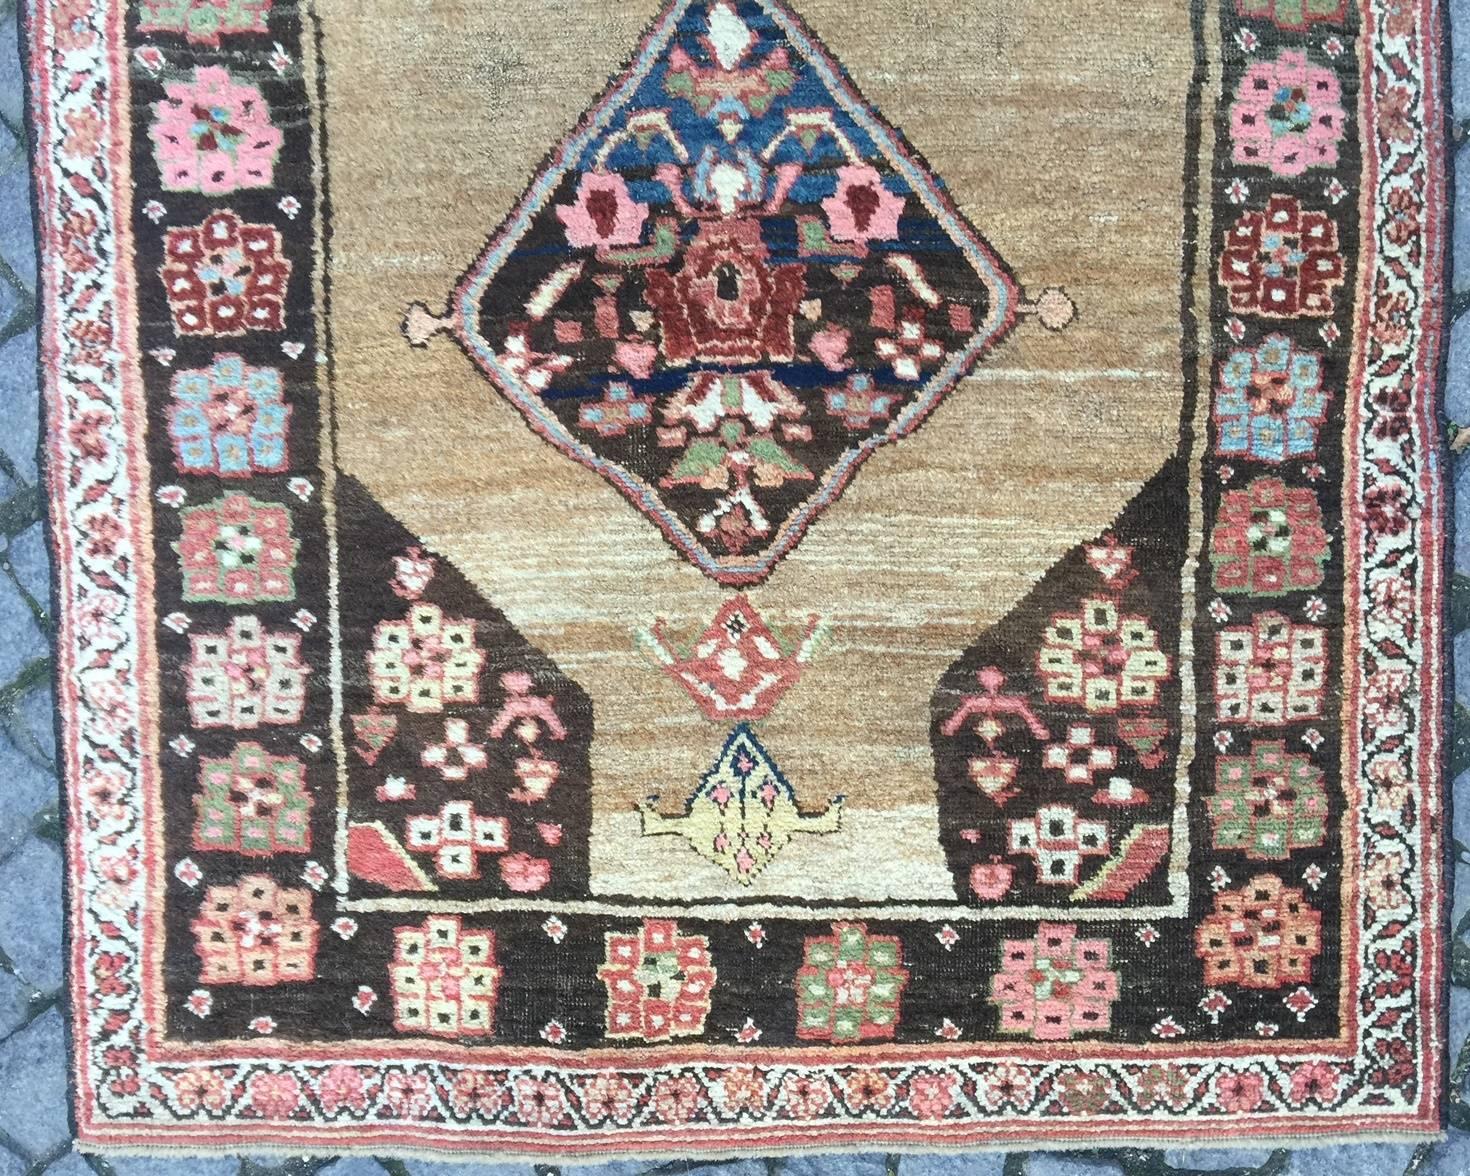 Antique North West Persian Bidjar rug with camel hair ground. Excellent condition.